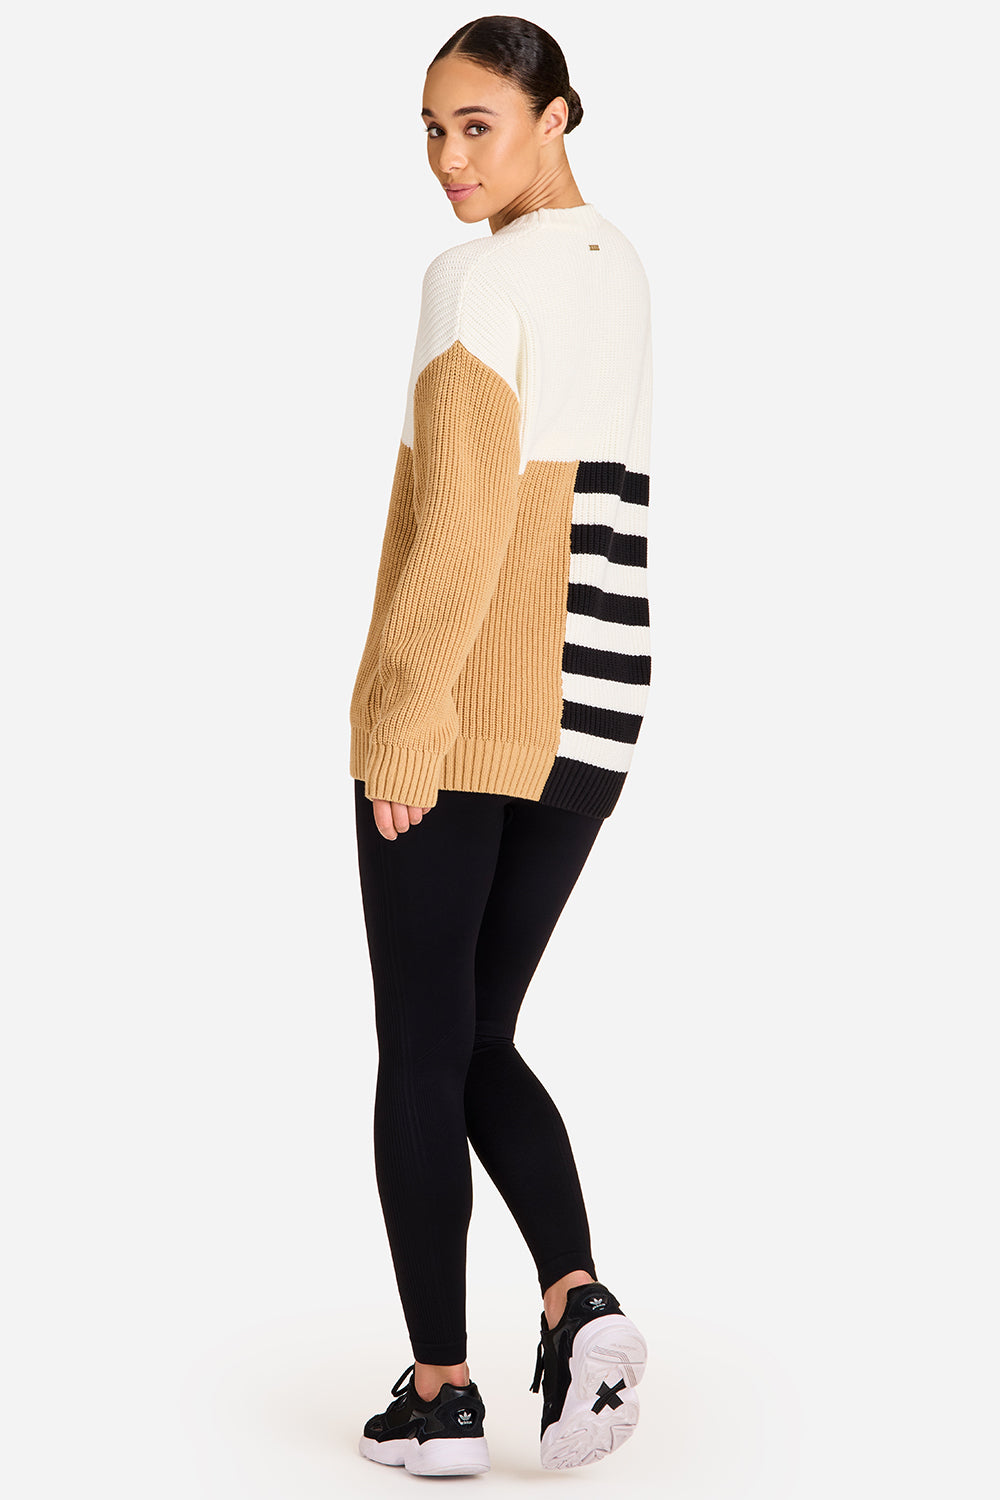 Alala knit sweater in camel, black, and bone